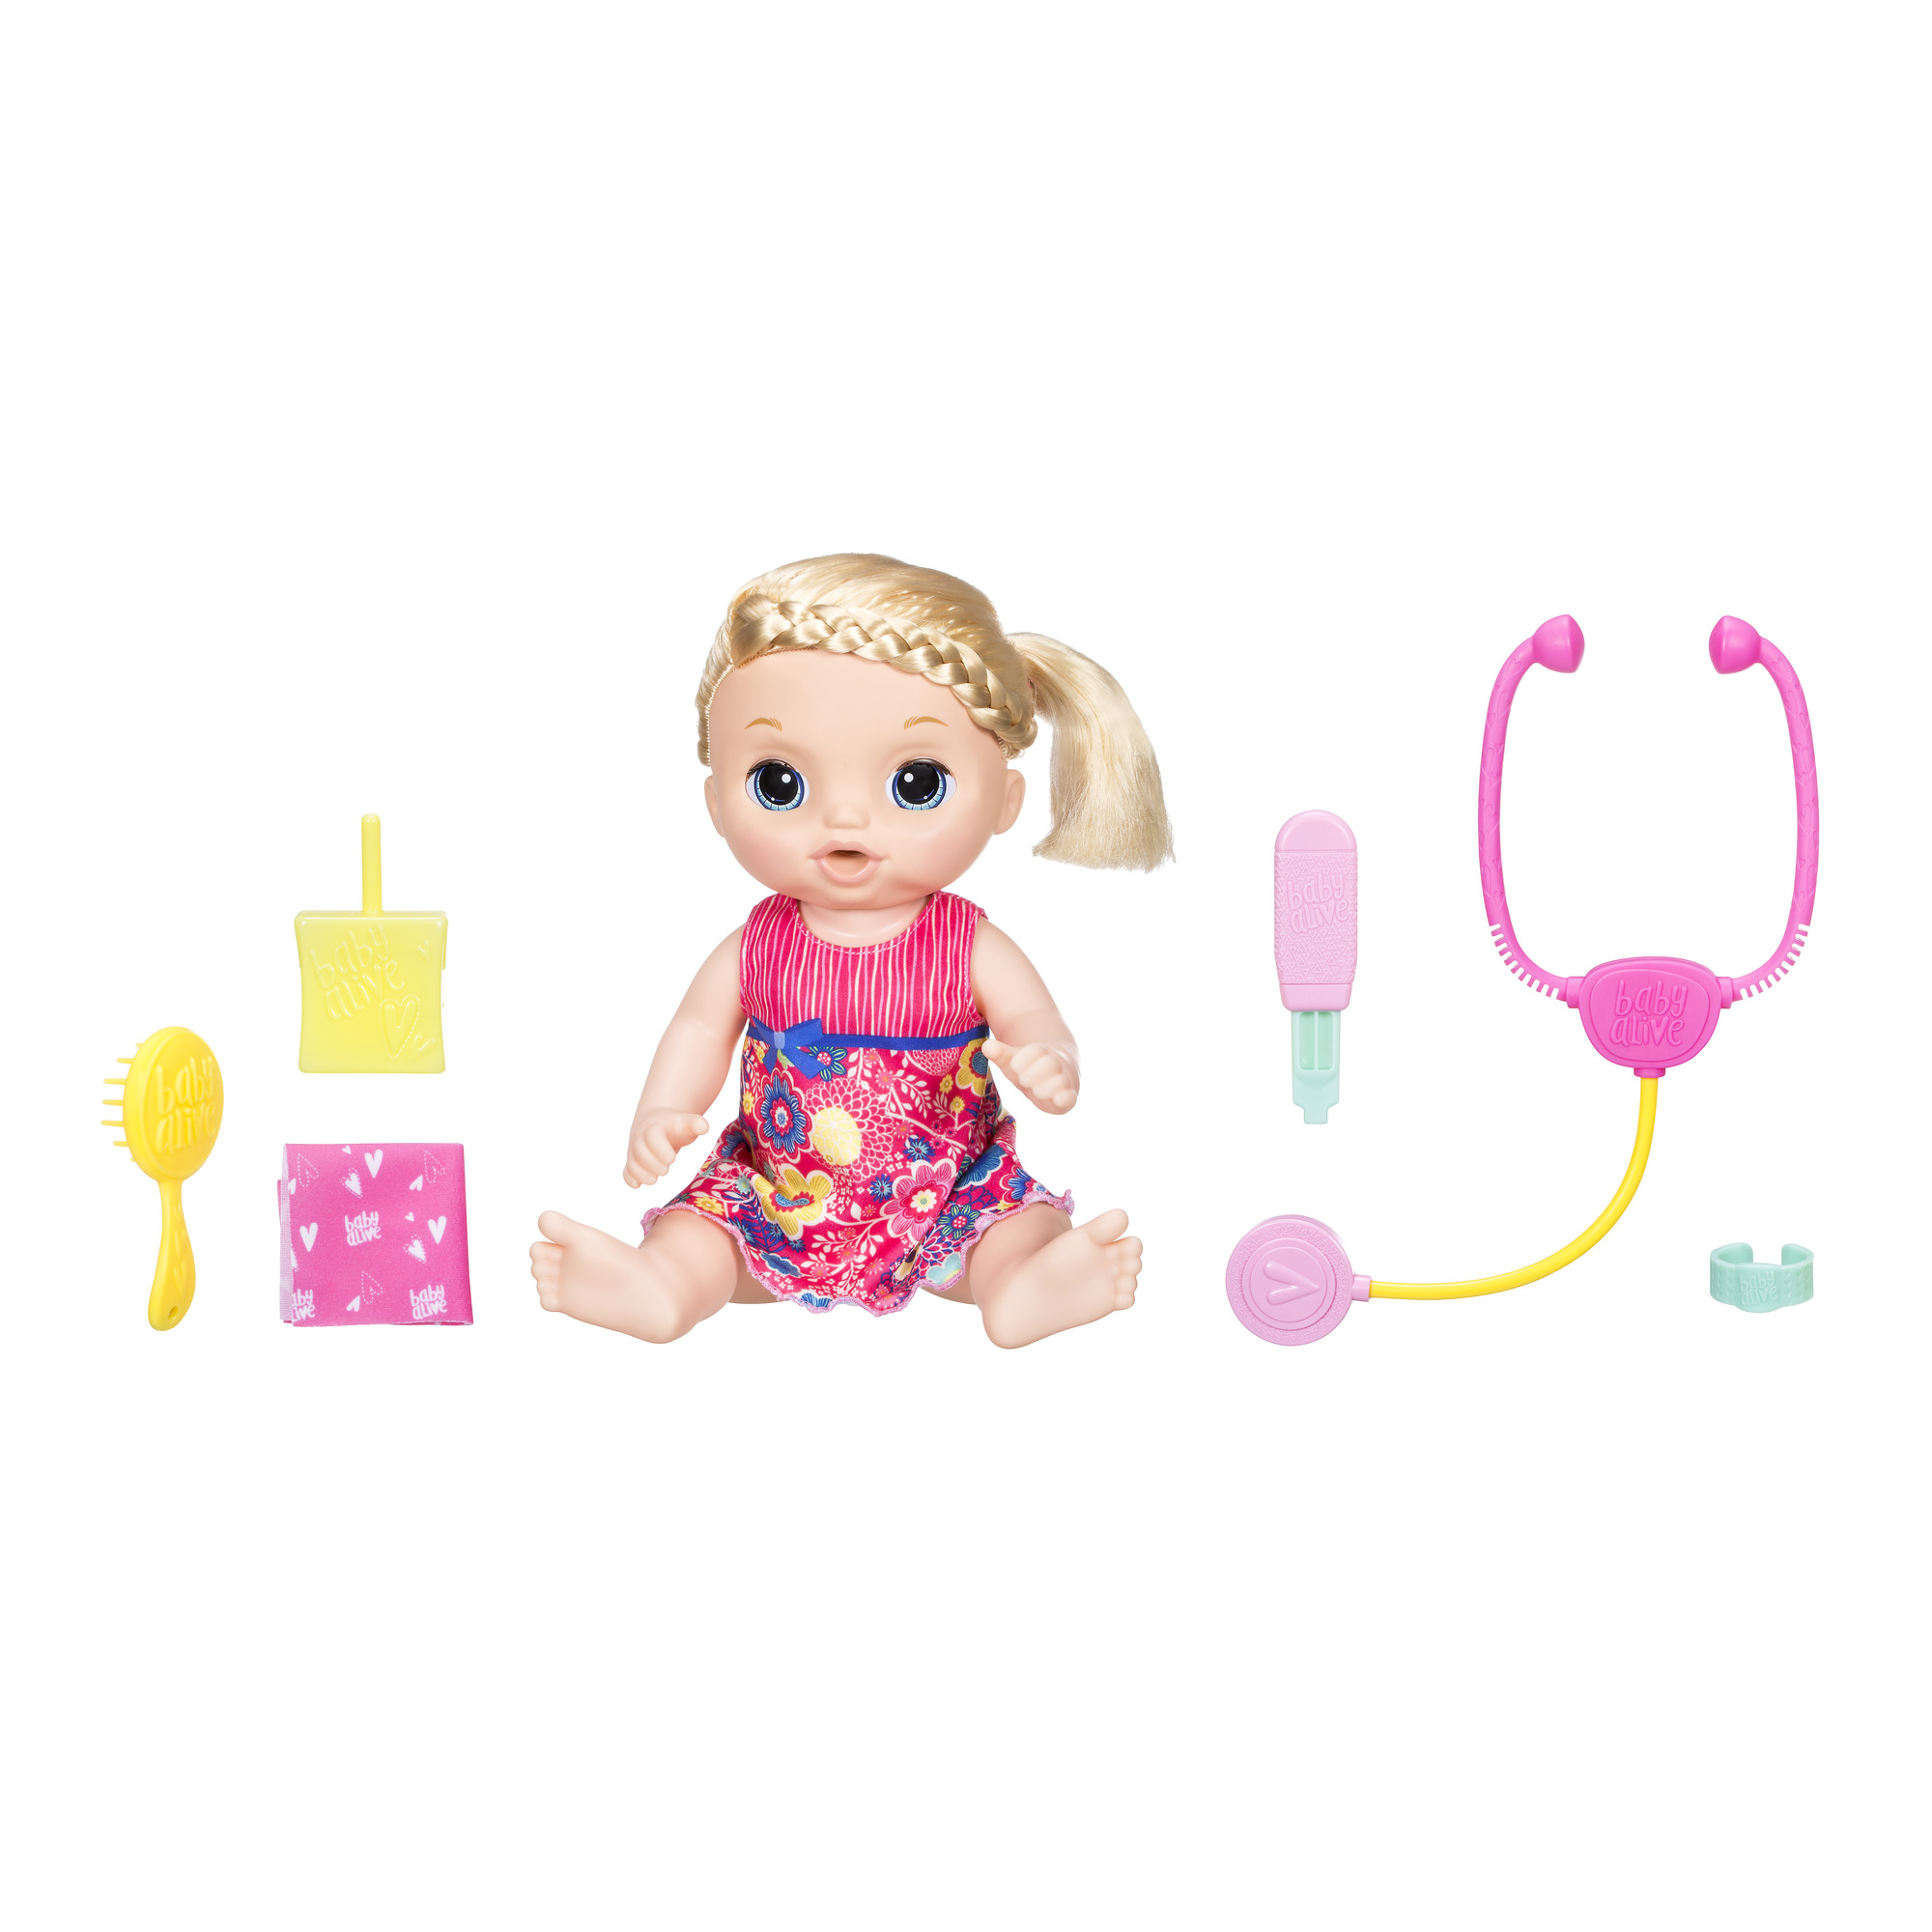 Baby Alive Sweet Tears Blonde Hair Baby Doll, Cries Tears, Doctor Visit Accessories - image 1 of 9